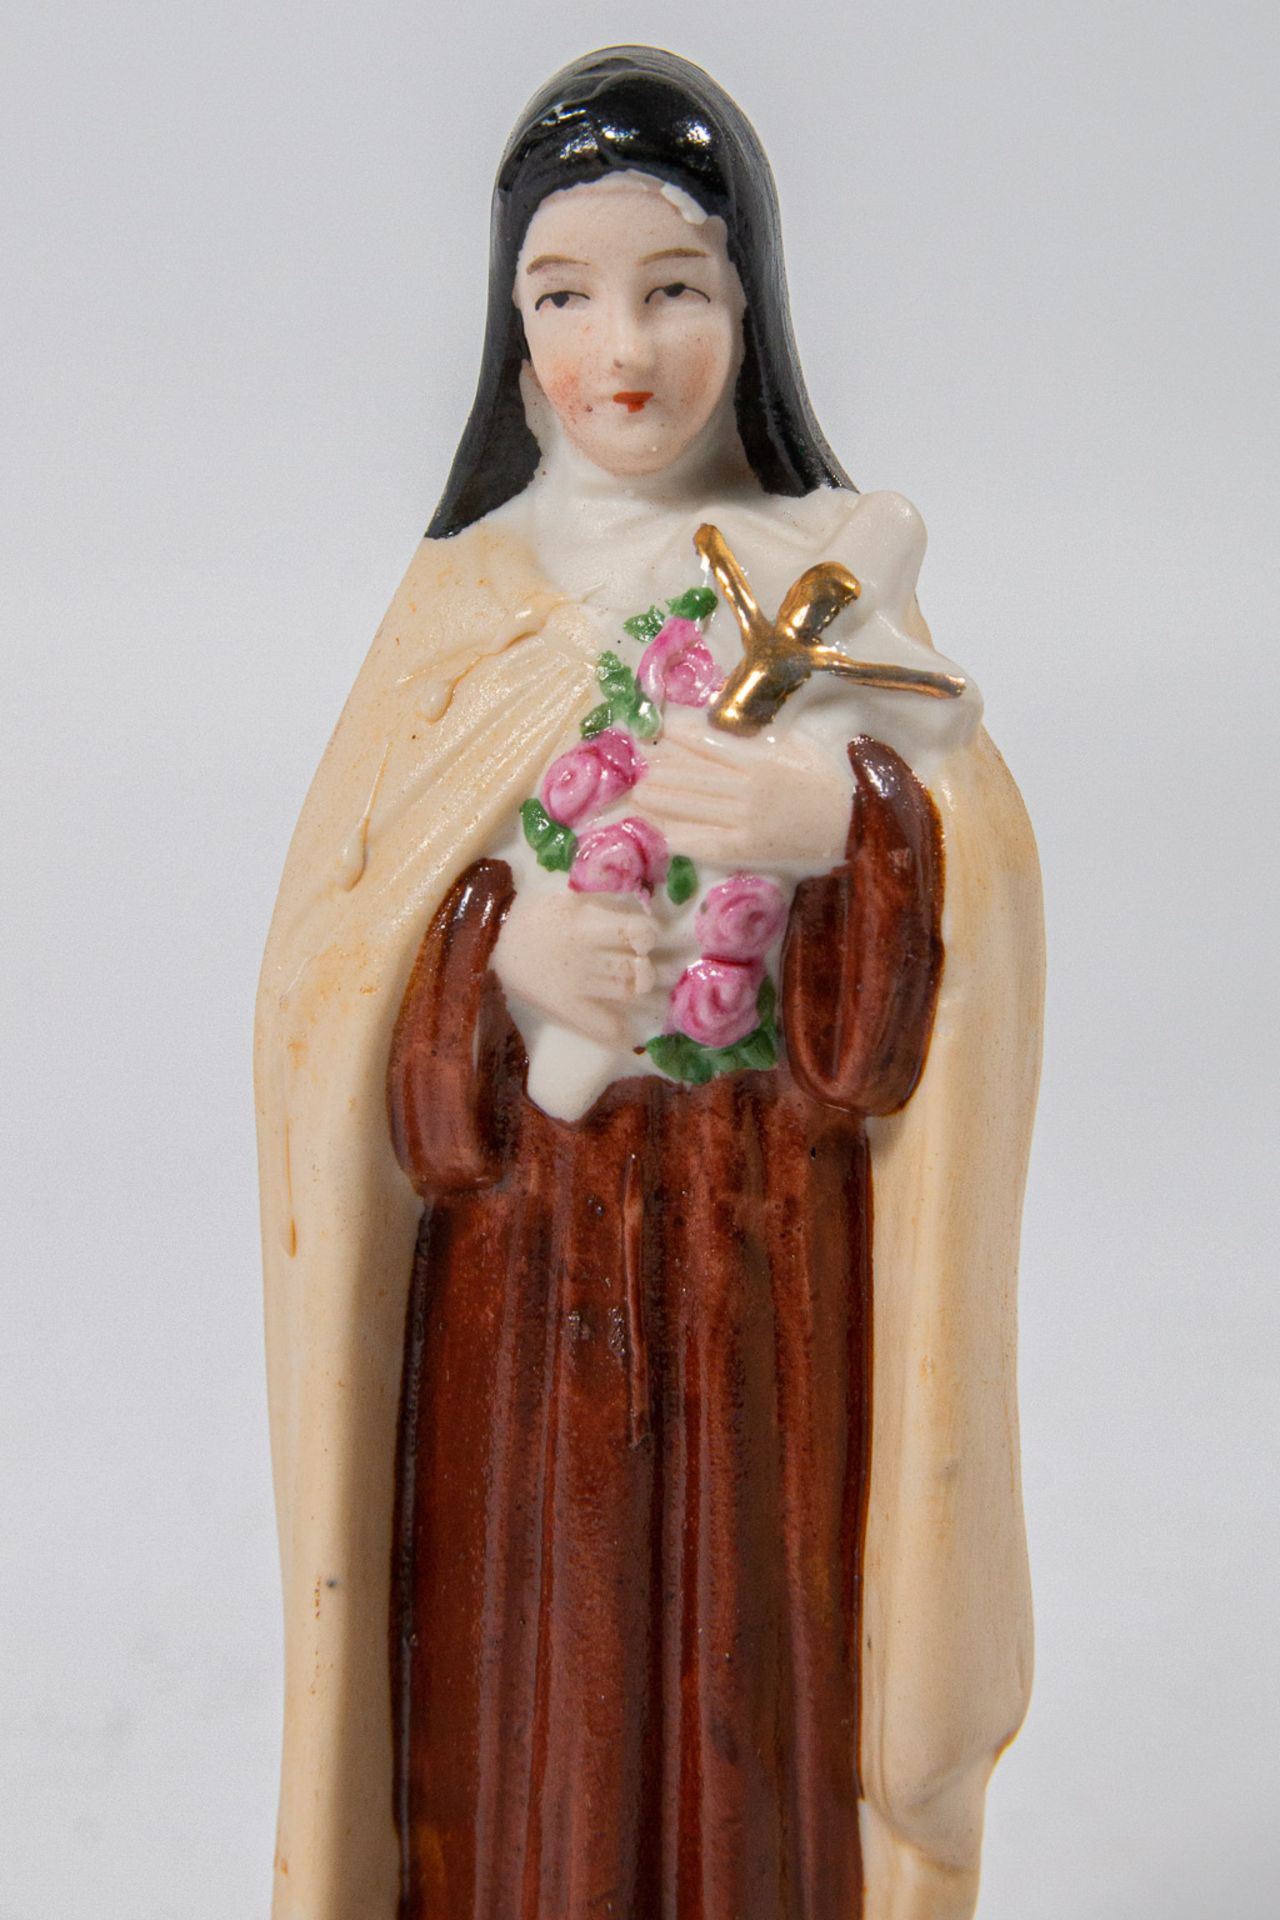 A collection of 11 bisque porcelain holy statues, Mary, Joseph, and Madonna. - Image 48 of 49